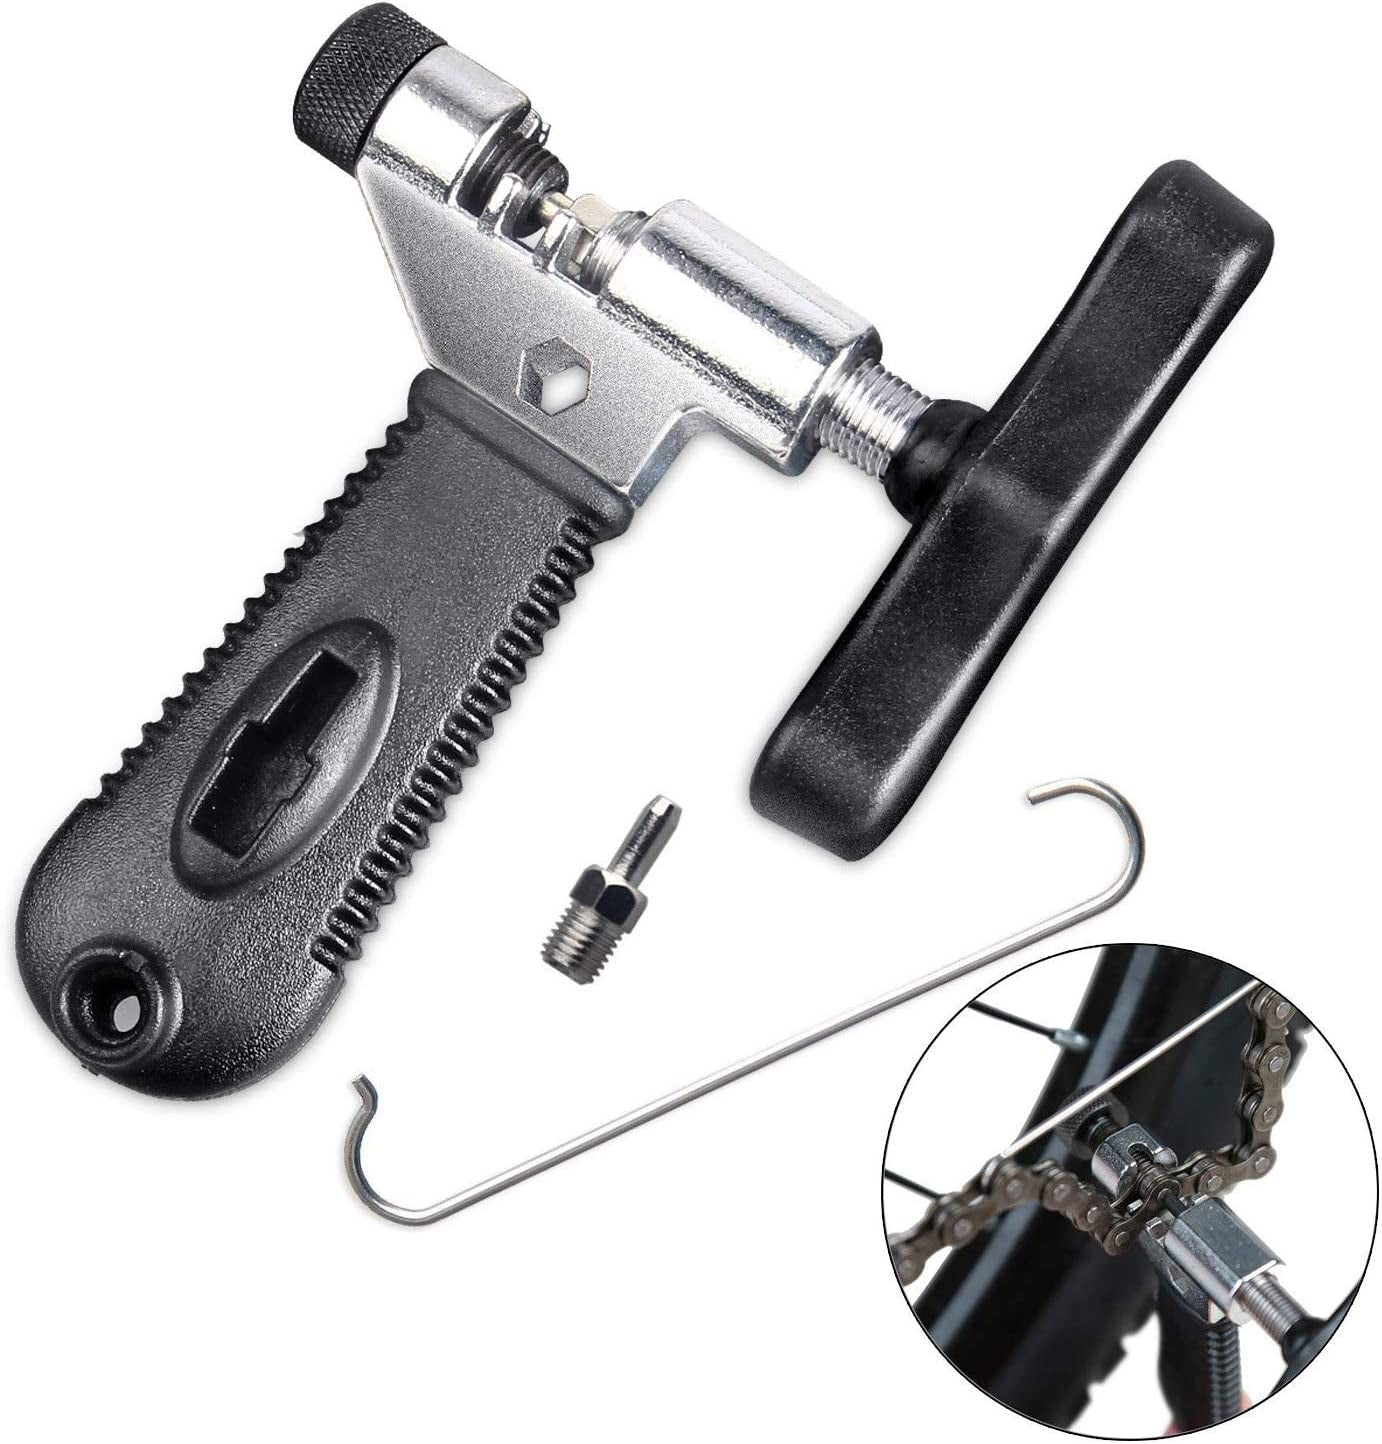 Bike Chain Tool, Universal for 7 8 9 10 Speed Chain Link Repair Removal with Backup Stainless Steel Pin, Easy Using Bicycle Chain Splitter Cutter Rivet Remover Portable for Road Mountain Bike